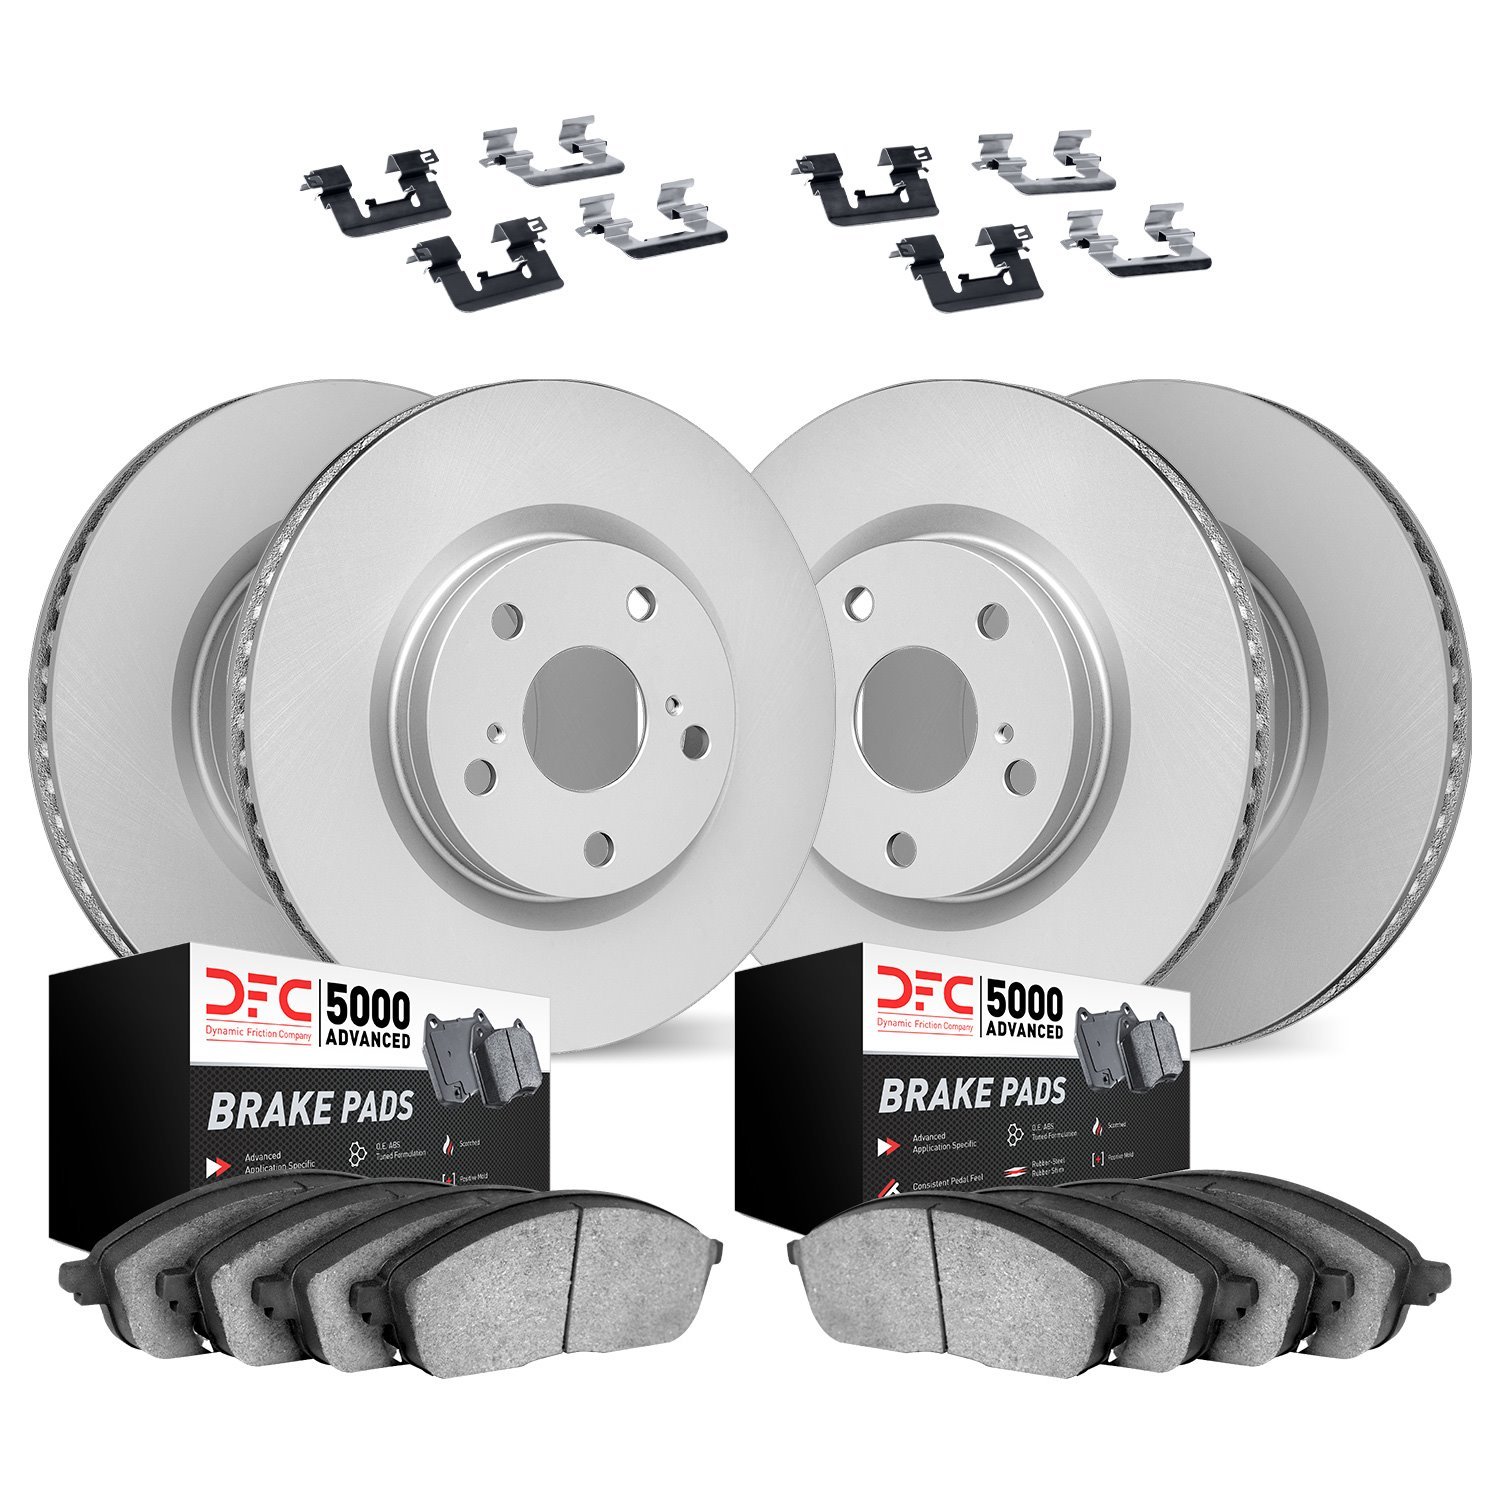 4514-75028 Geospec Brake Rotors w/5000 Advanced Brake Pads Kit & Hardware, Fits Select Lexus/Toyota/Scion, Position: Front and R